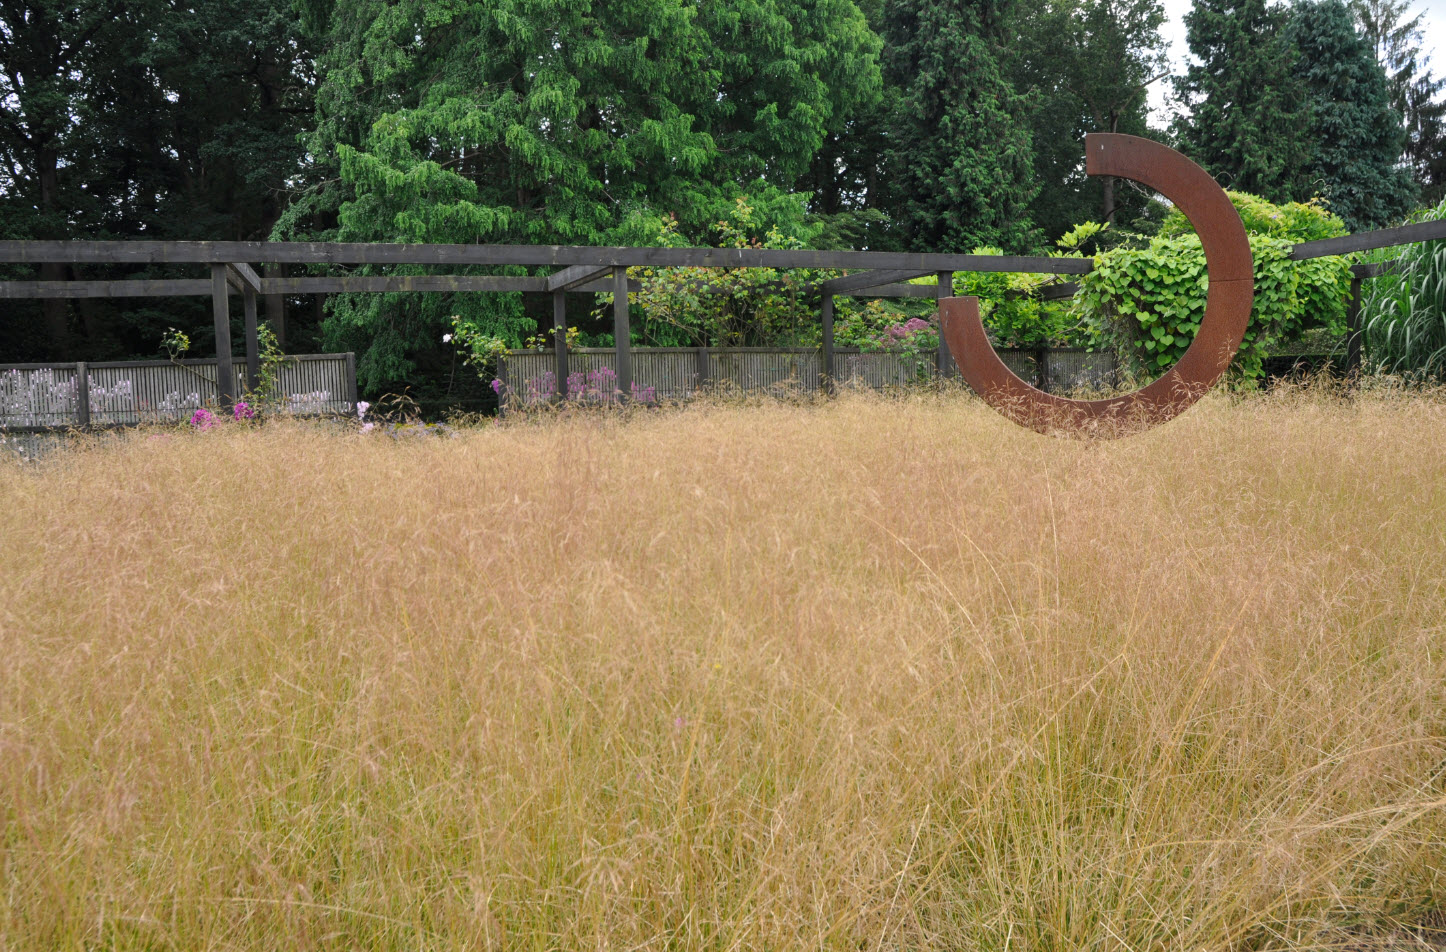 Deschampsia cespitosa  'Goldtau' at the garden of Mien Ruys : Kurt Bluemel - Horticultural Royalty Remembered -Thinking Outside the Boxwood, 